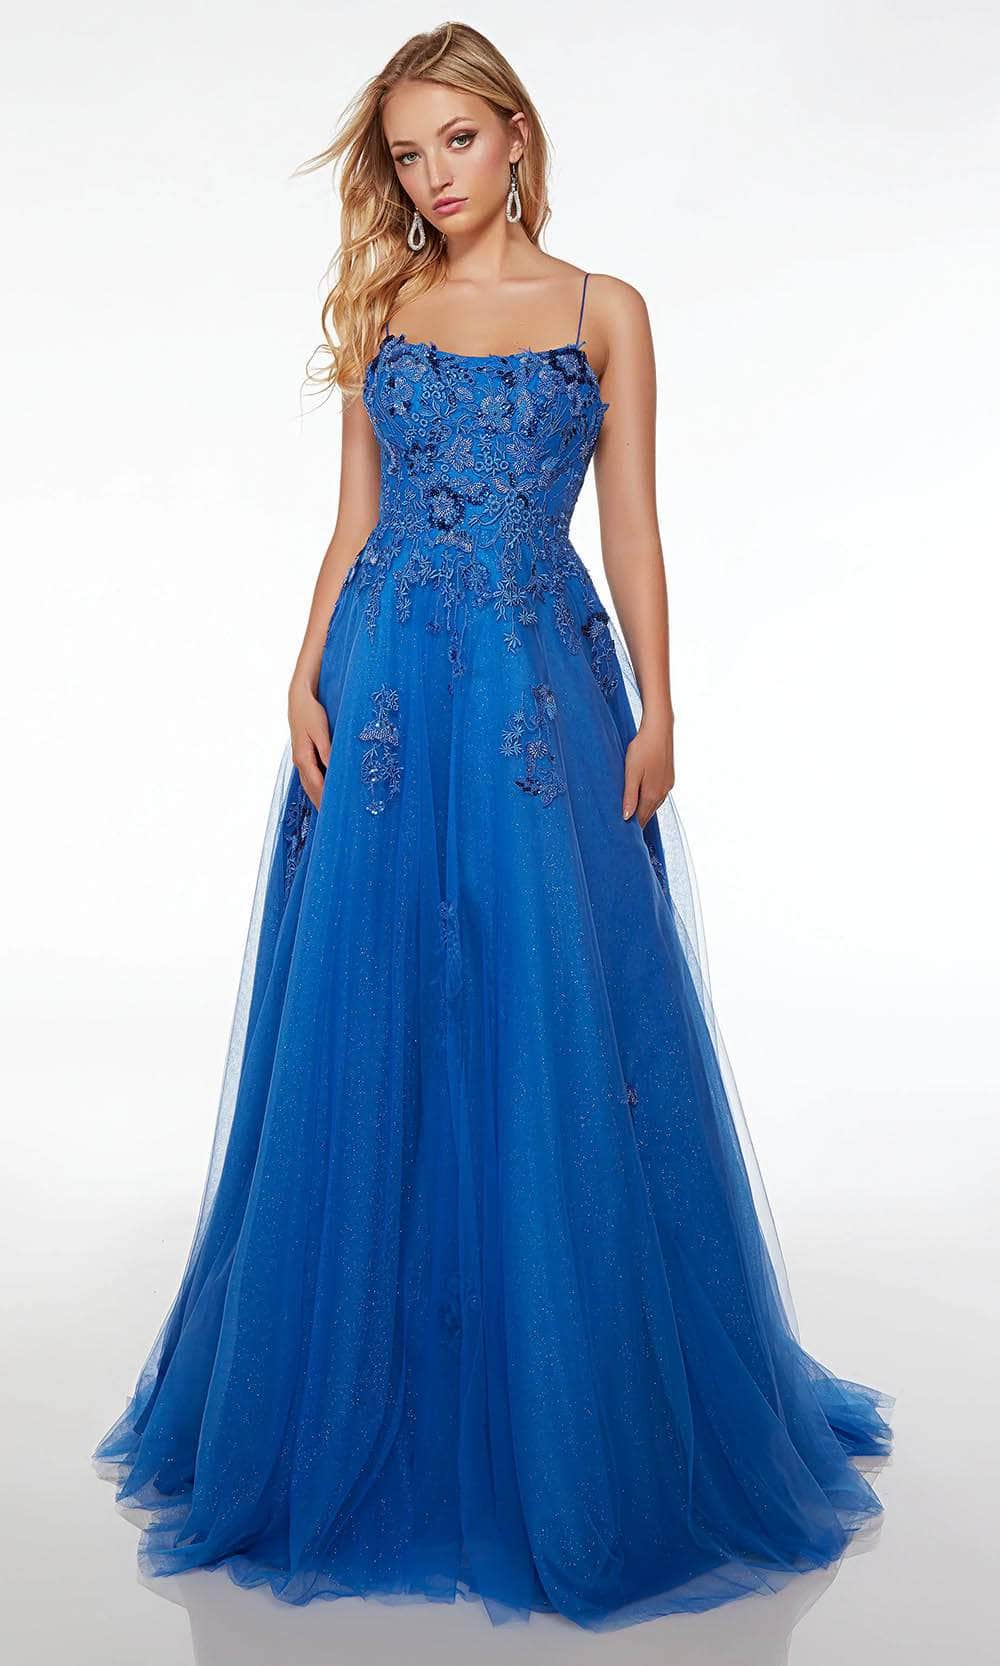 Image of Alyce Paris 61479 - Lace Appliqued Scoop Prom Gown